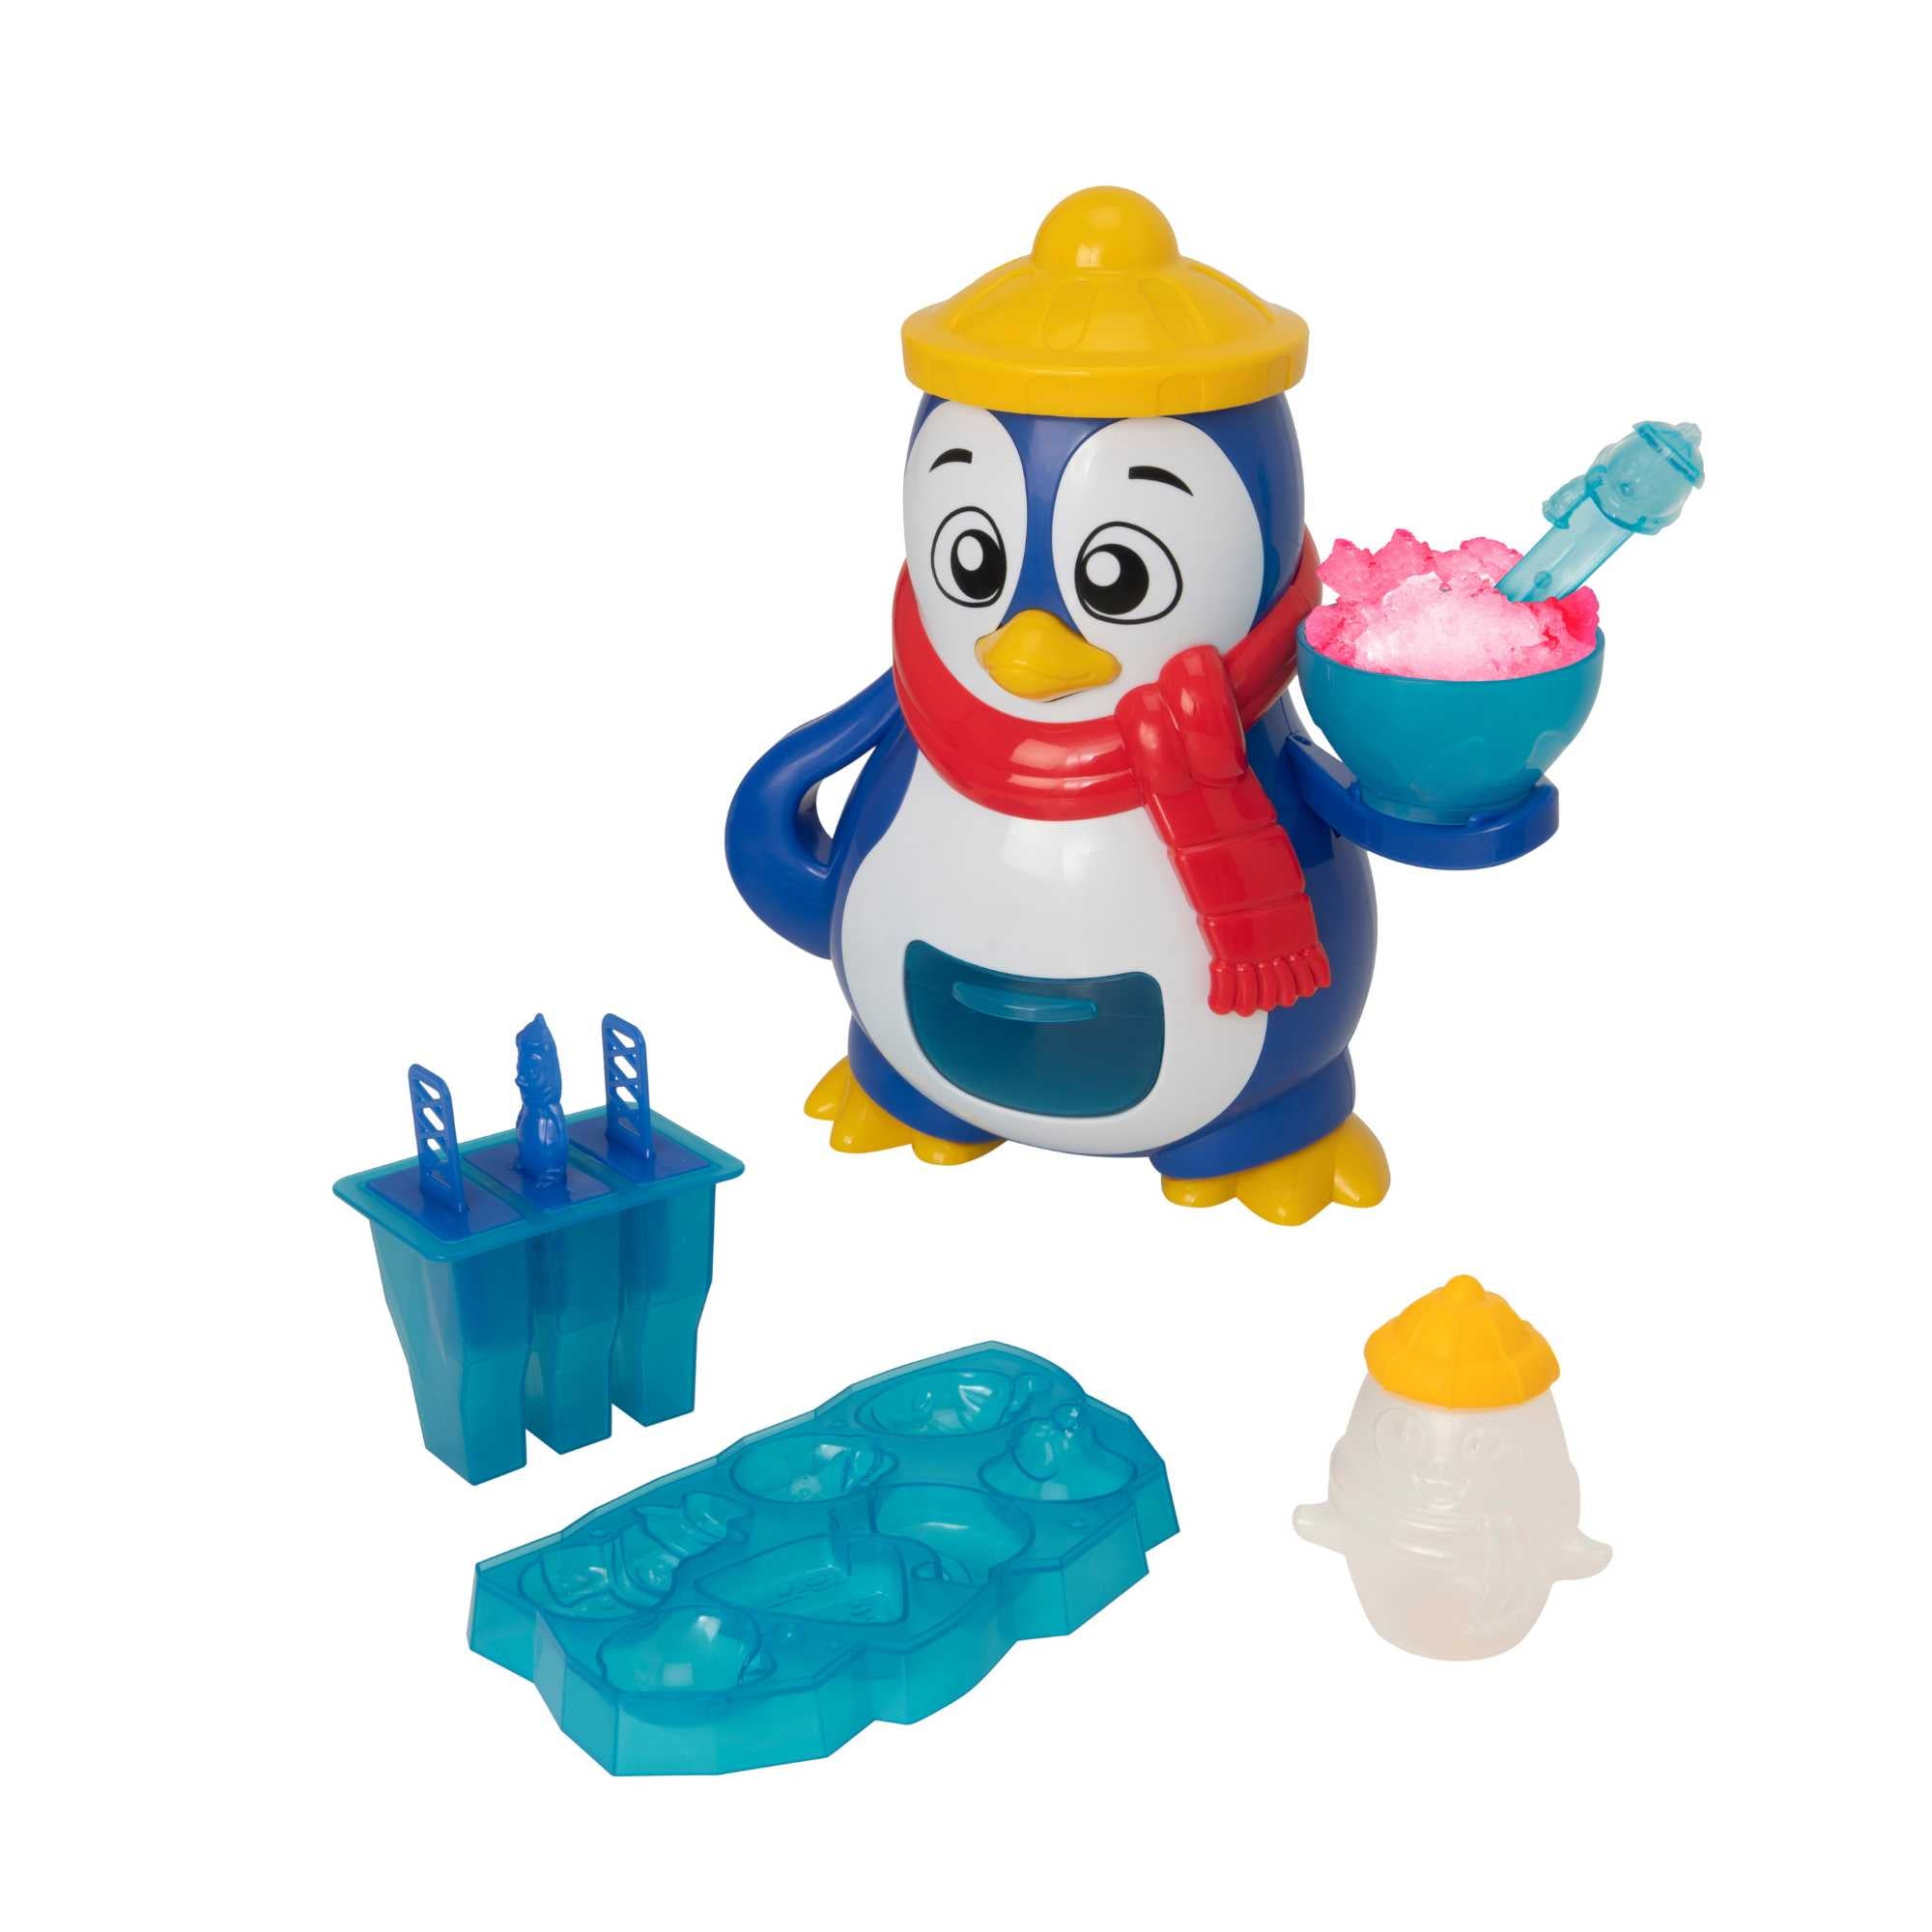 Polar Penguin Ice Maker Toy Set featuring a penguin-shaped ice crusher, ice lolly moulds, ice cube tray, and a bottle for syrups. Perfect for kids, this fun and educational set allows them to create delicious frozen treats, promoting creativity and learning about the science of freezing. 